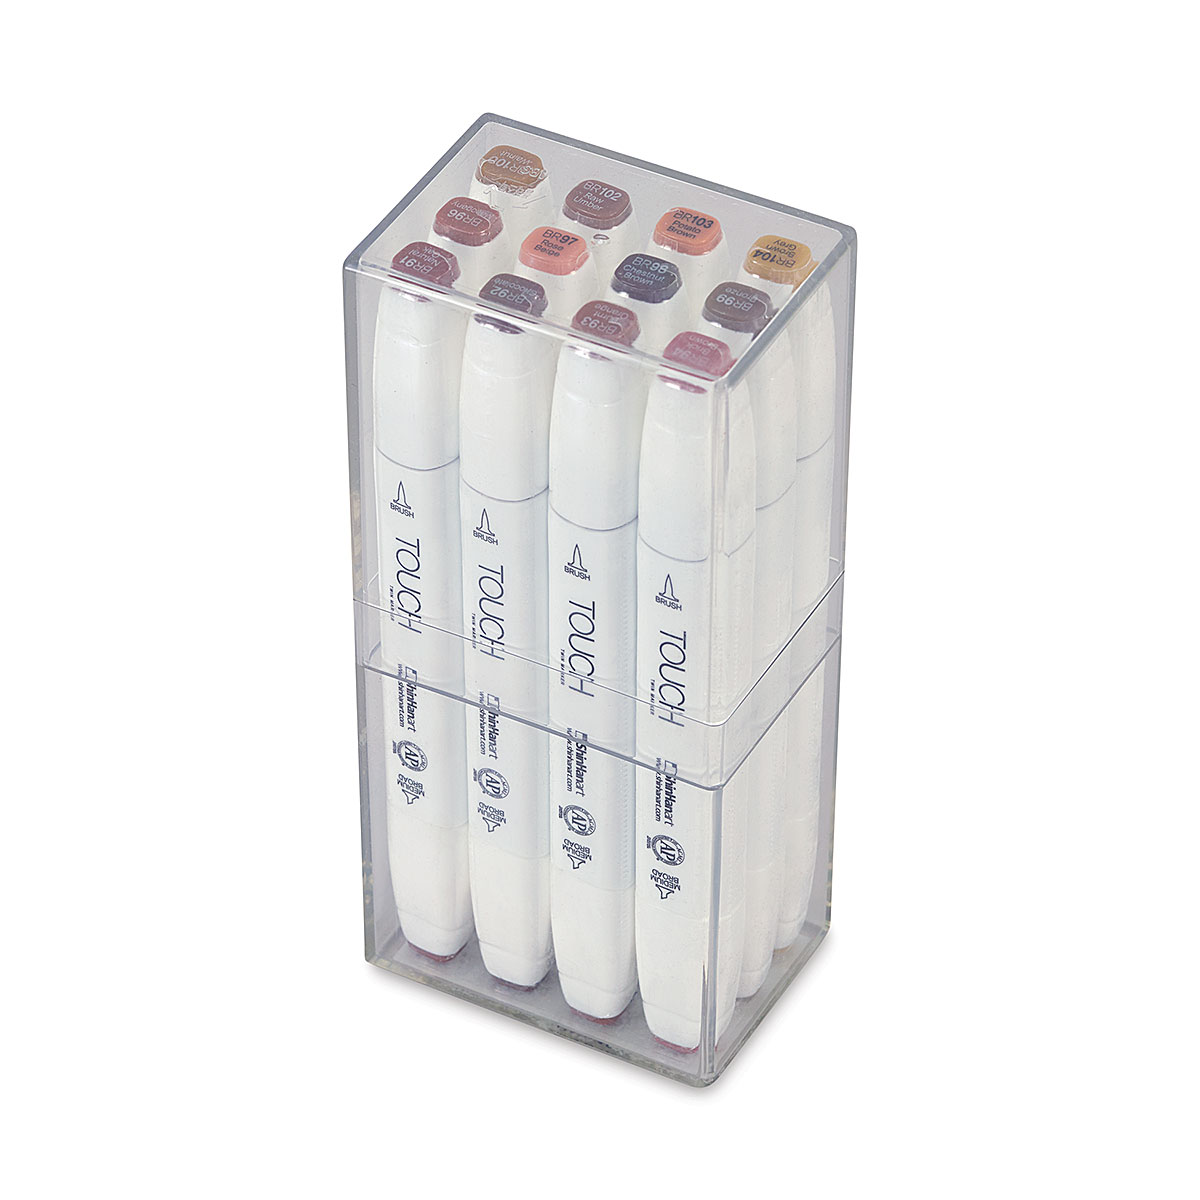 ShinHan Art 36-Set TOUCH Twin Markers (1103600)